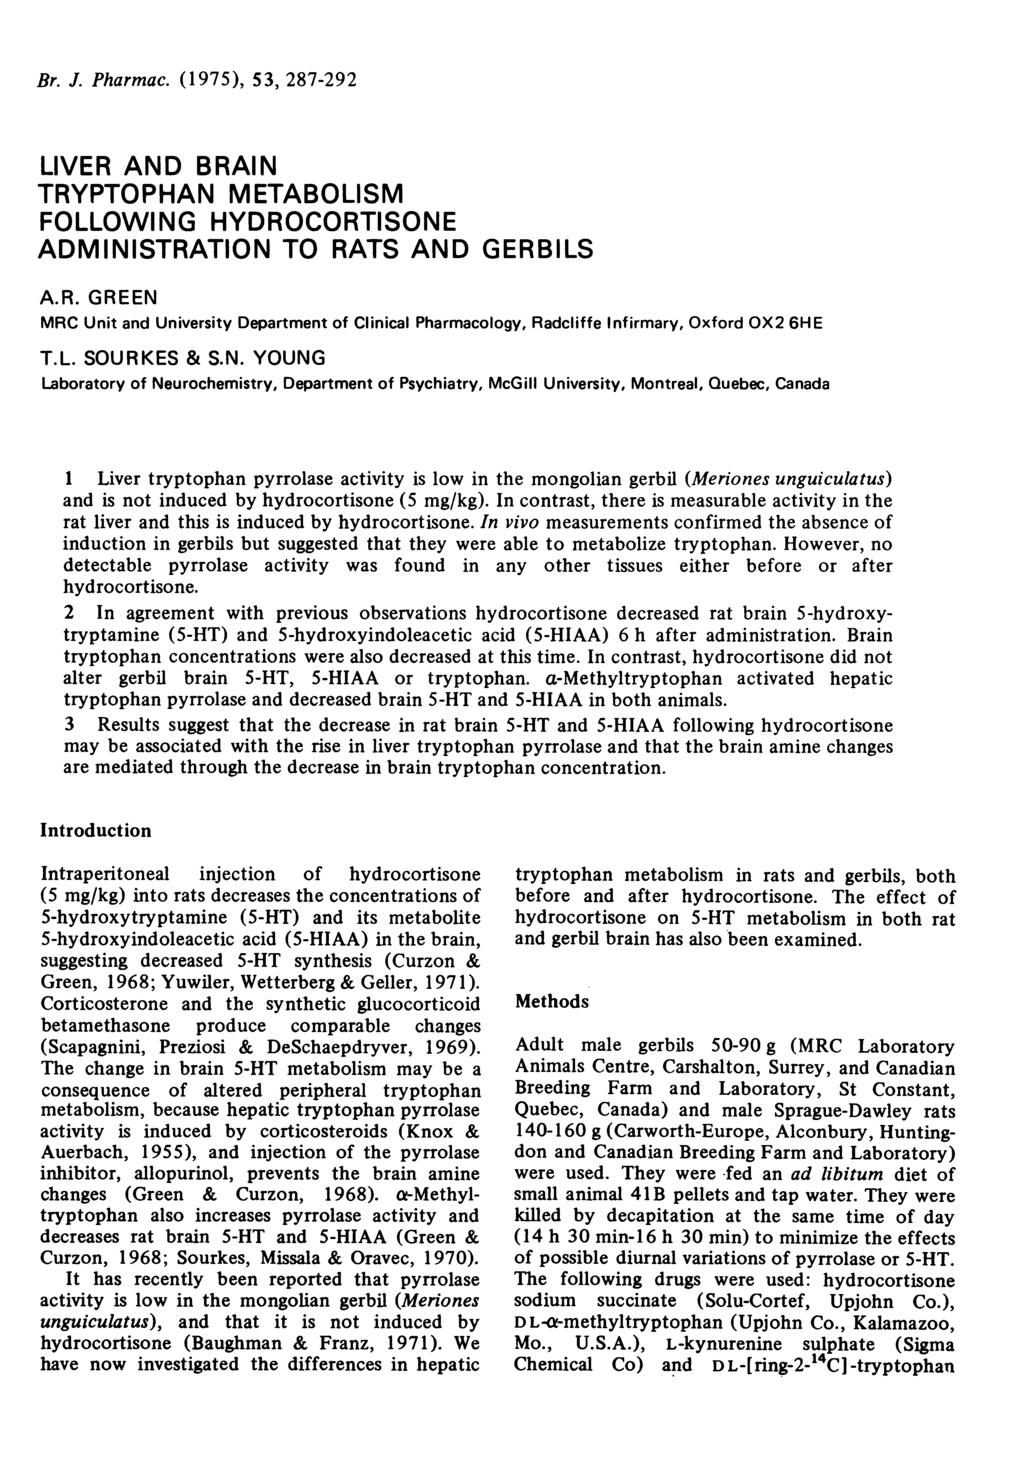 Br. J. Pharmac. (1975), 53, 287-292 LIVER A BRAIN TRYPTOPHAN METABOLISM FOLLOWING HYDROCORTISONE ADMINISTRATION TO RATS A GERBILS A.R. GREEN MRC Unit and University Department of Clinical Pharmacology, Radcliffe Infirmary, Oxford OX2 6HE T.